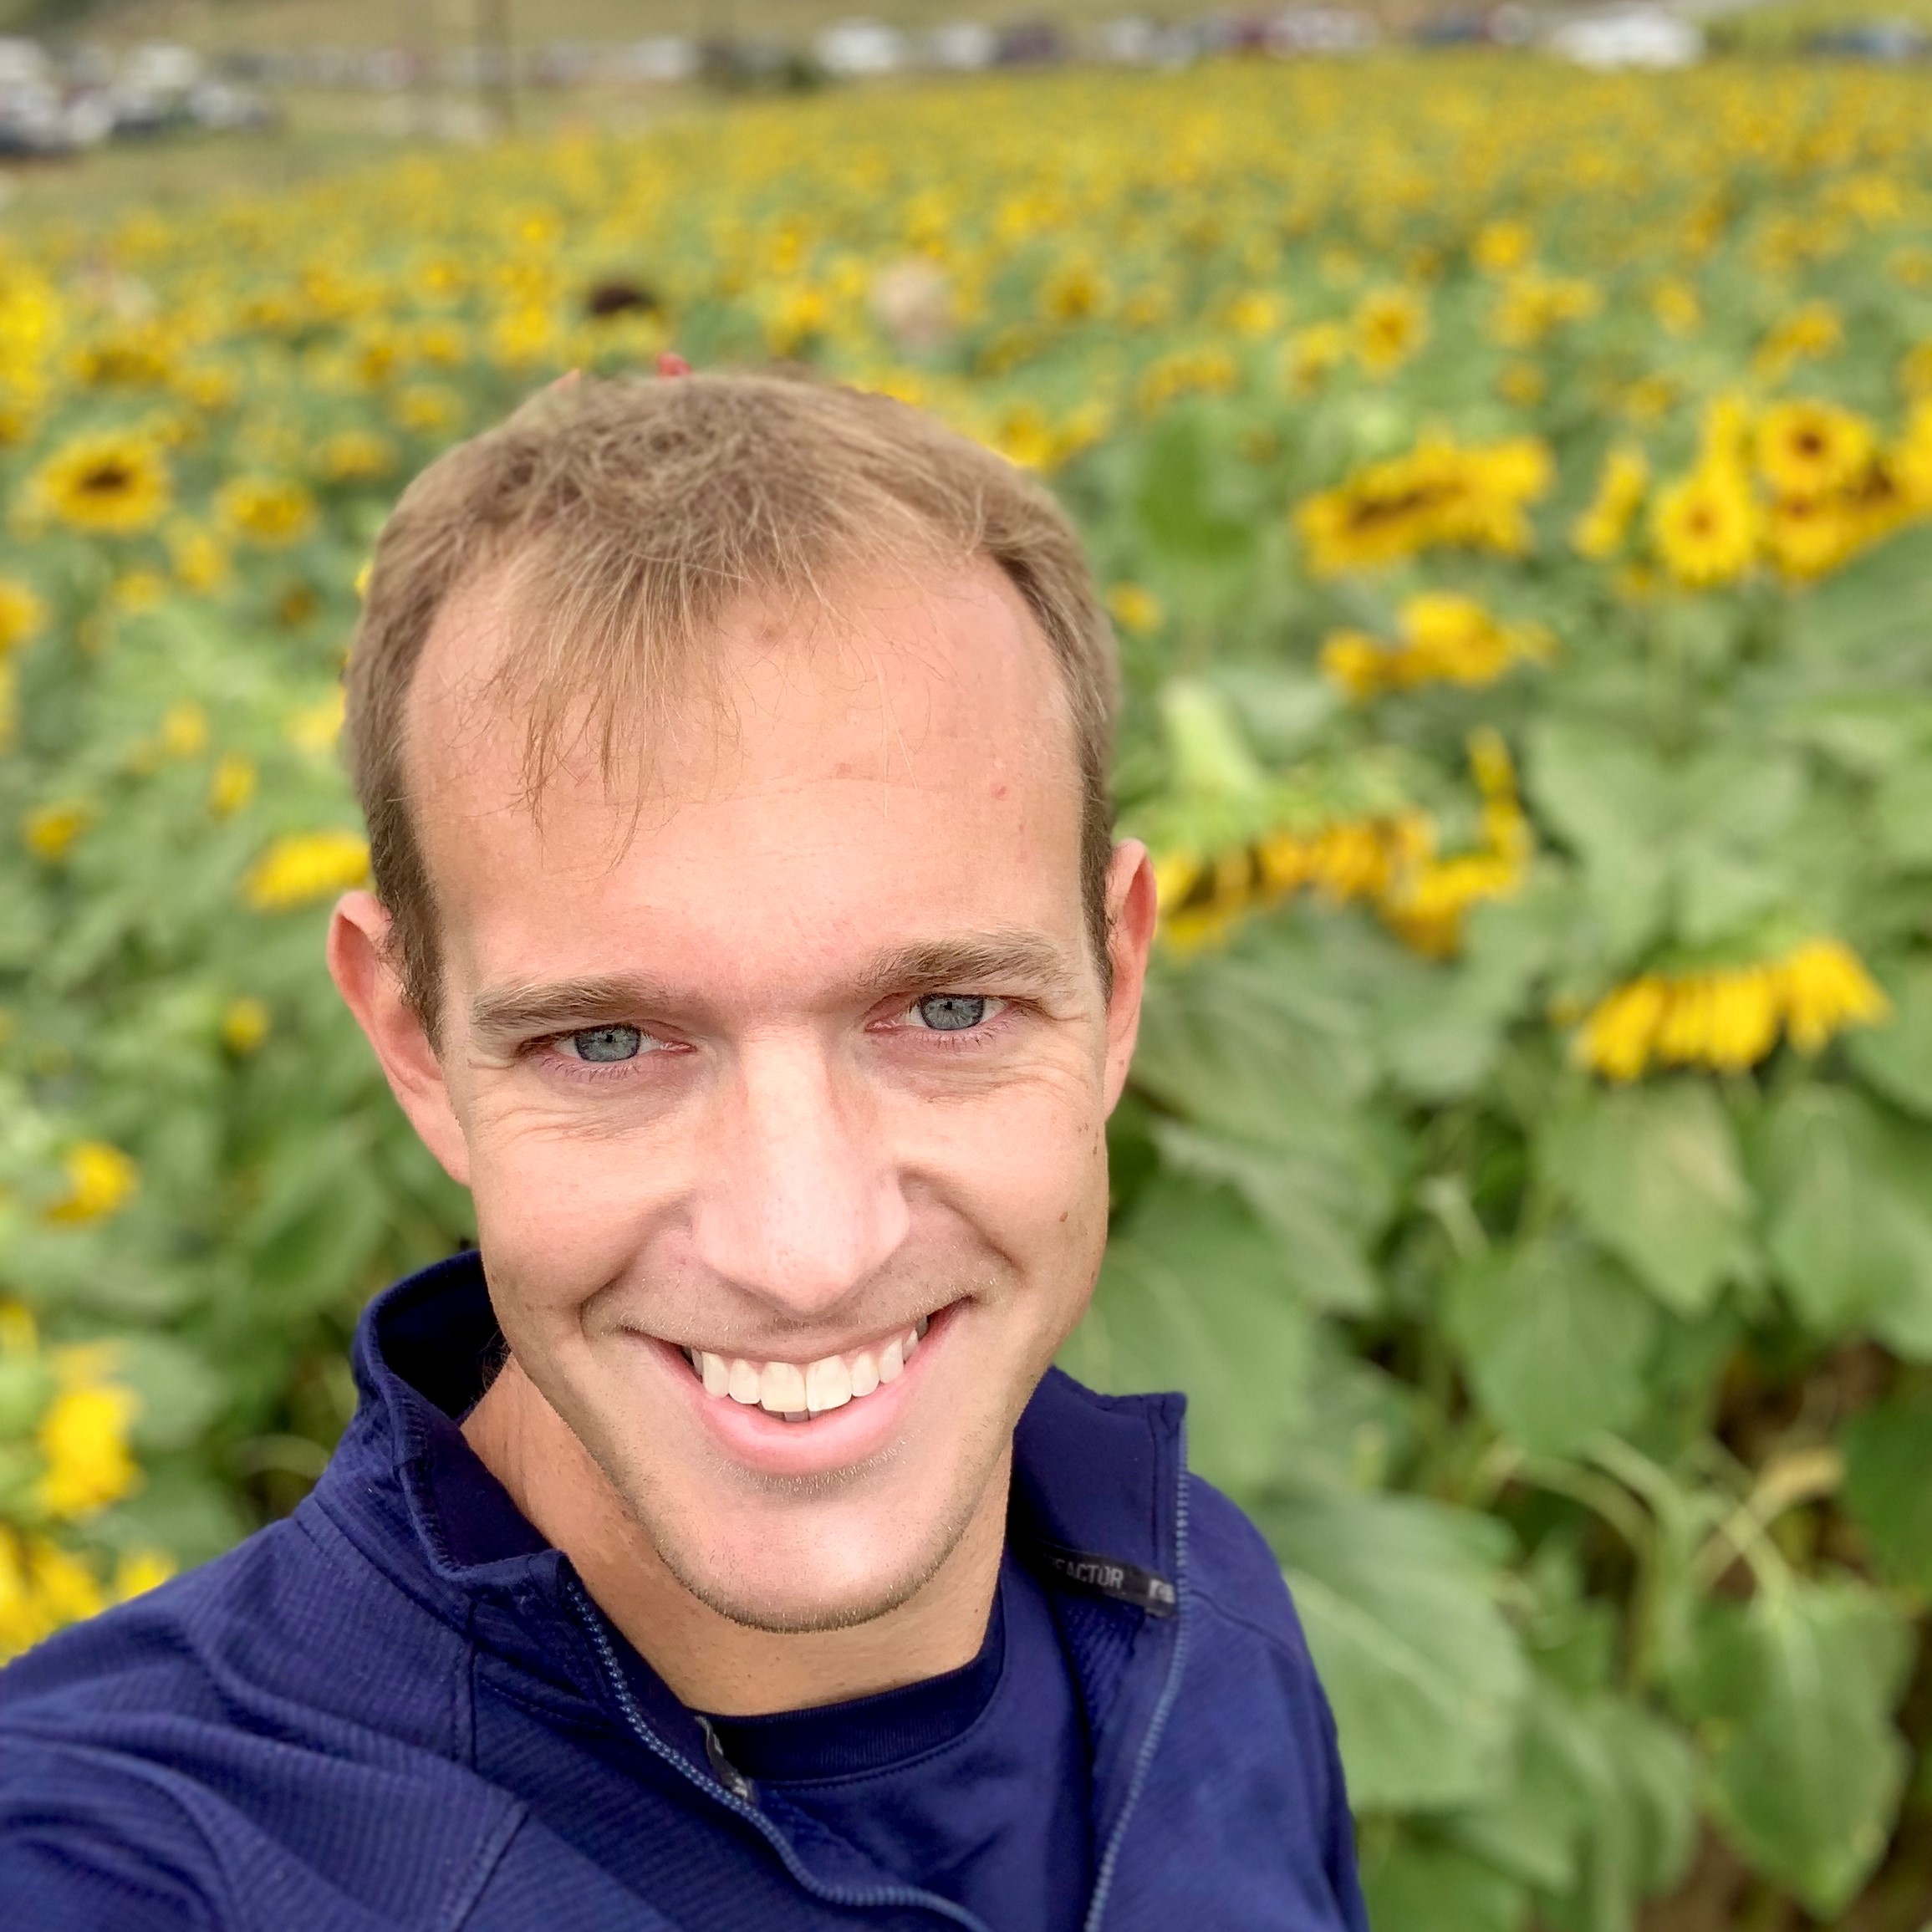 Me, smiling happily at the camera with a field of sunflowers in the background.